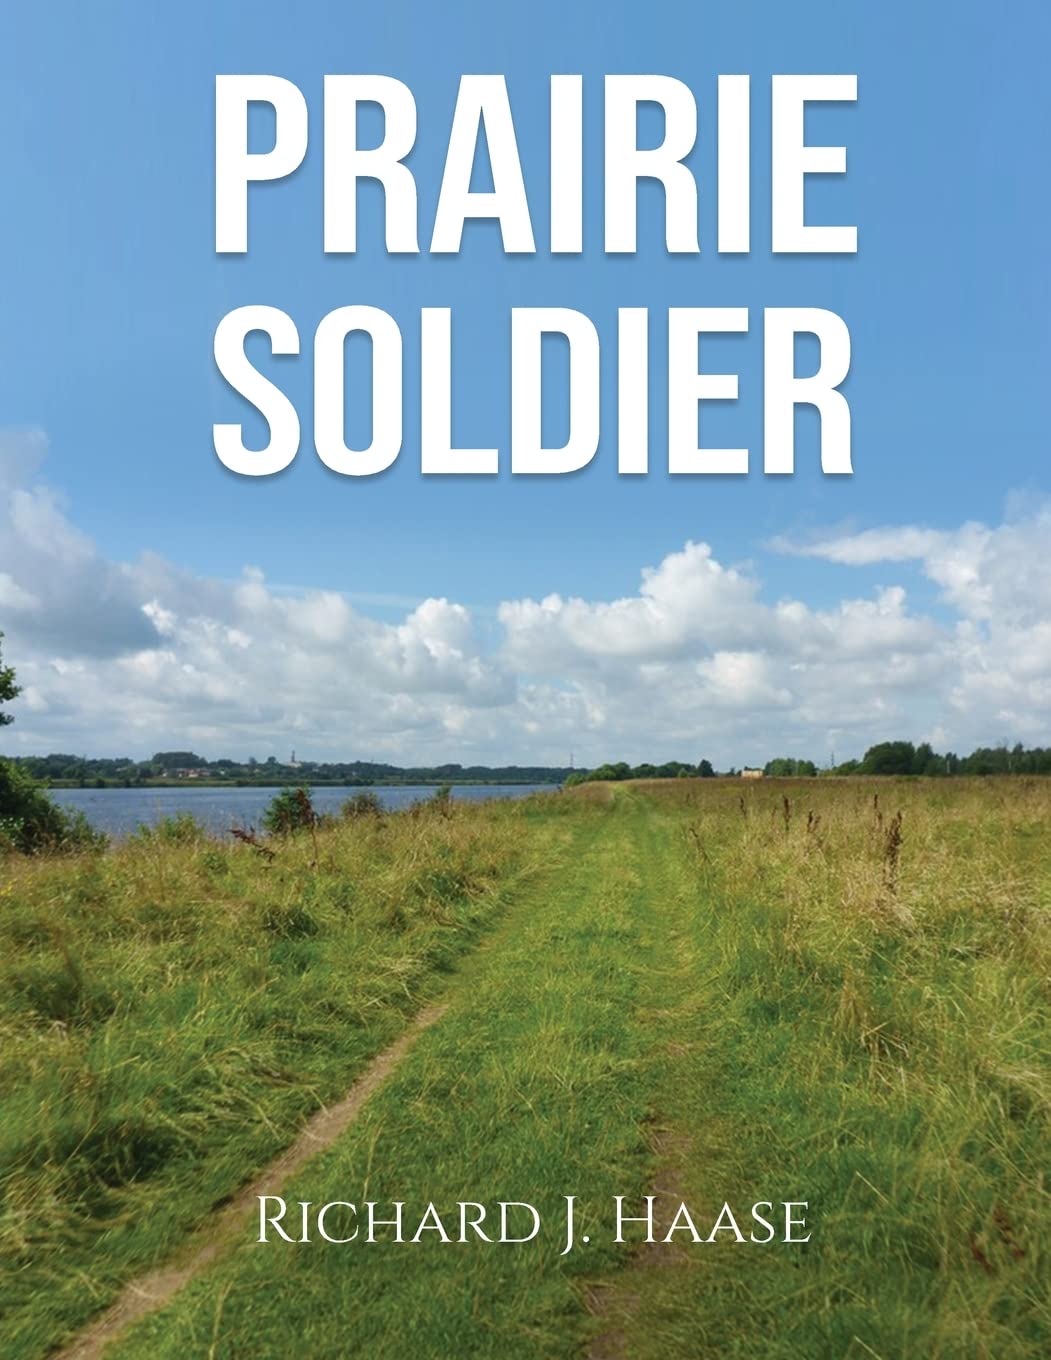 From Cornfield to Battlefield: Author Richard Haase's New Book "Prairie Soldier" Offers Personal Account of the Korean War and Life After